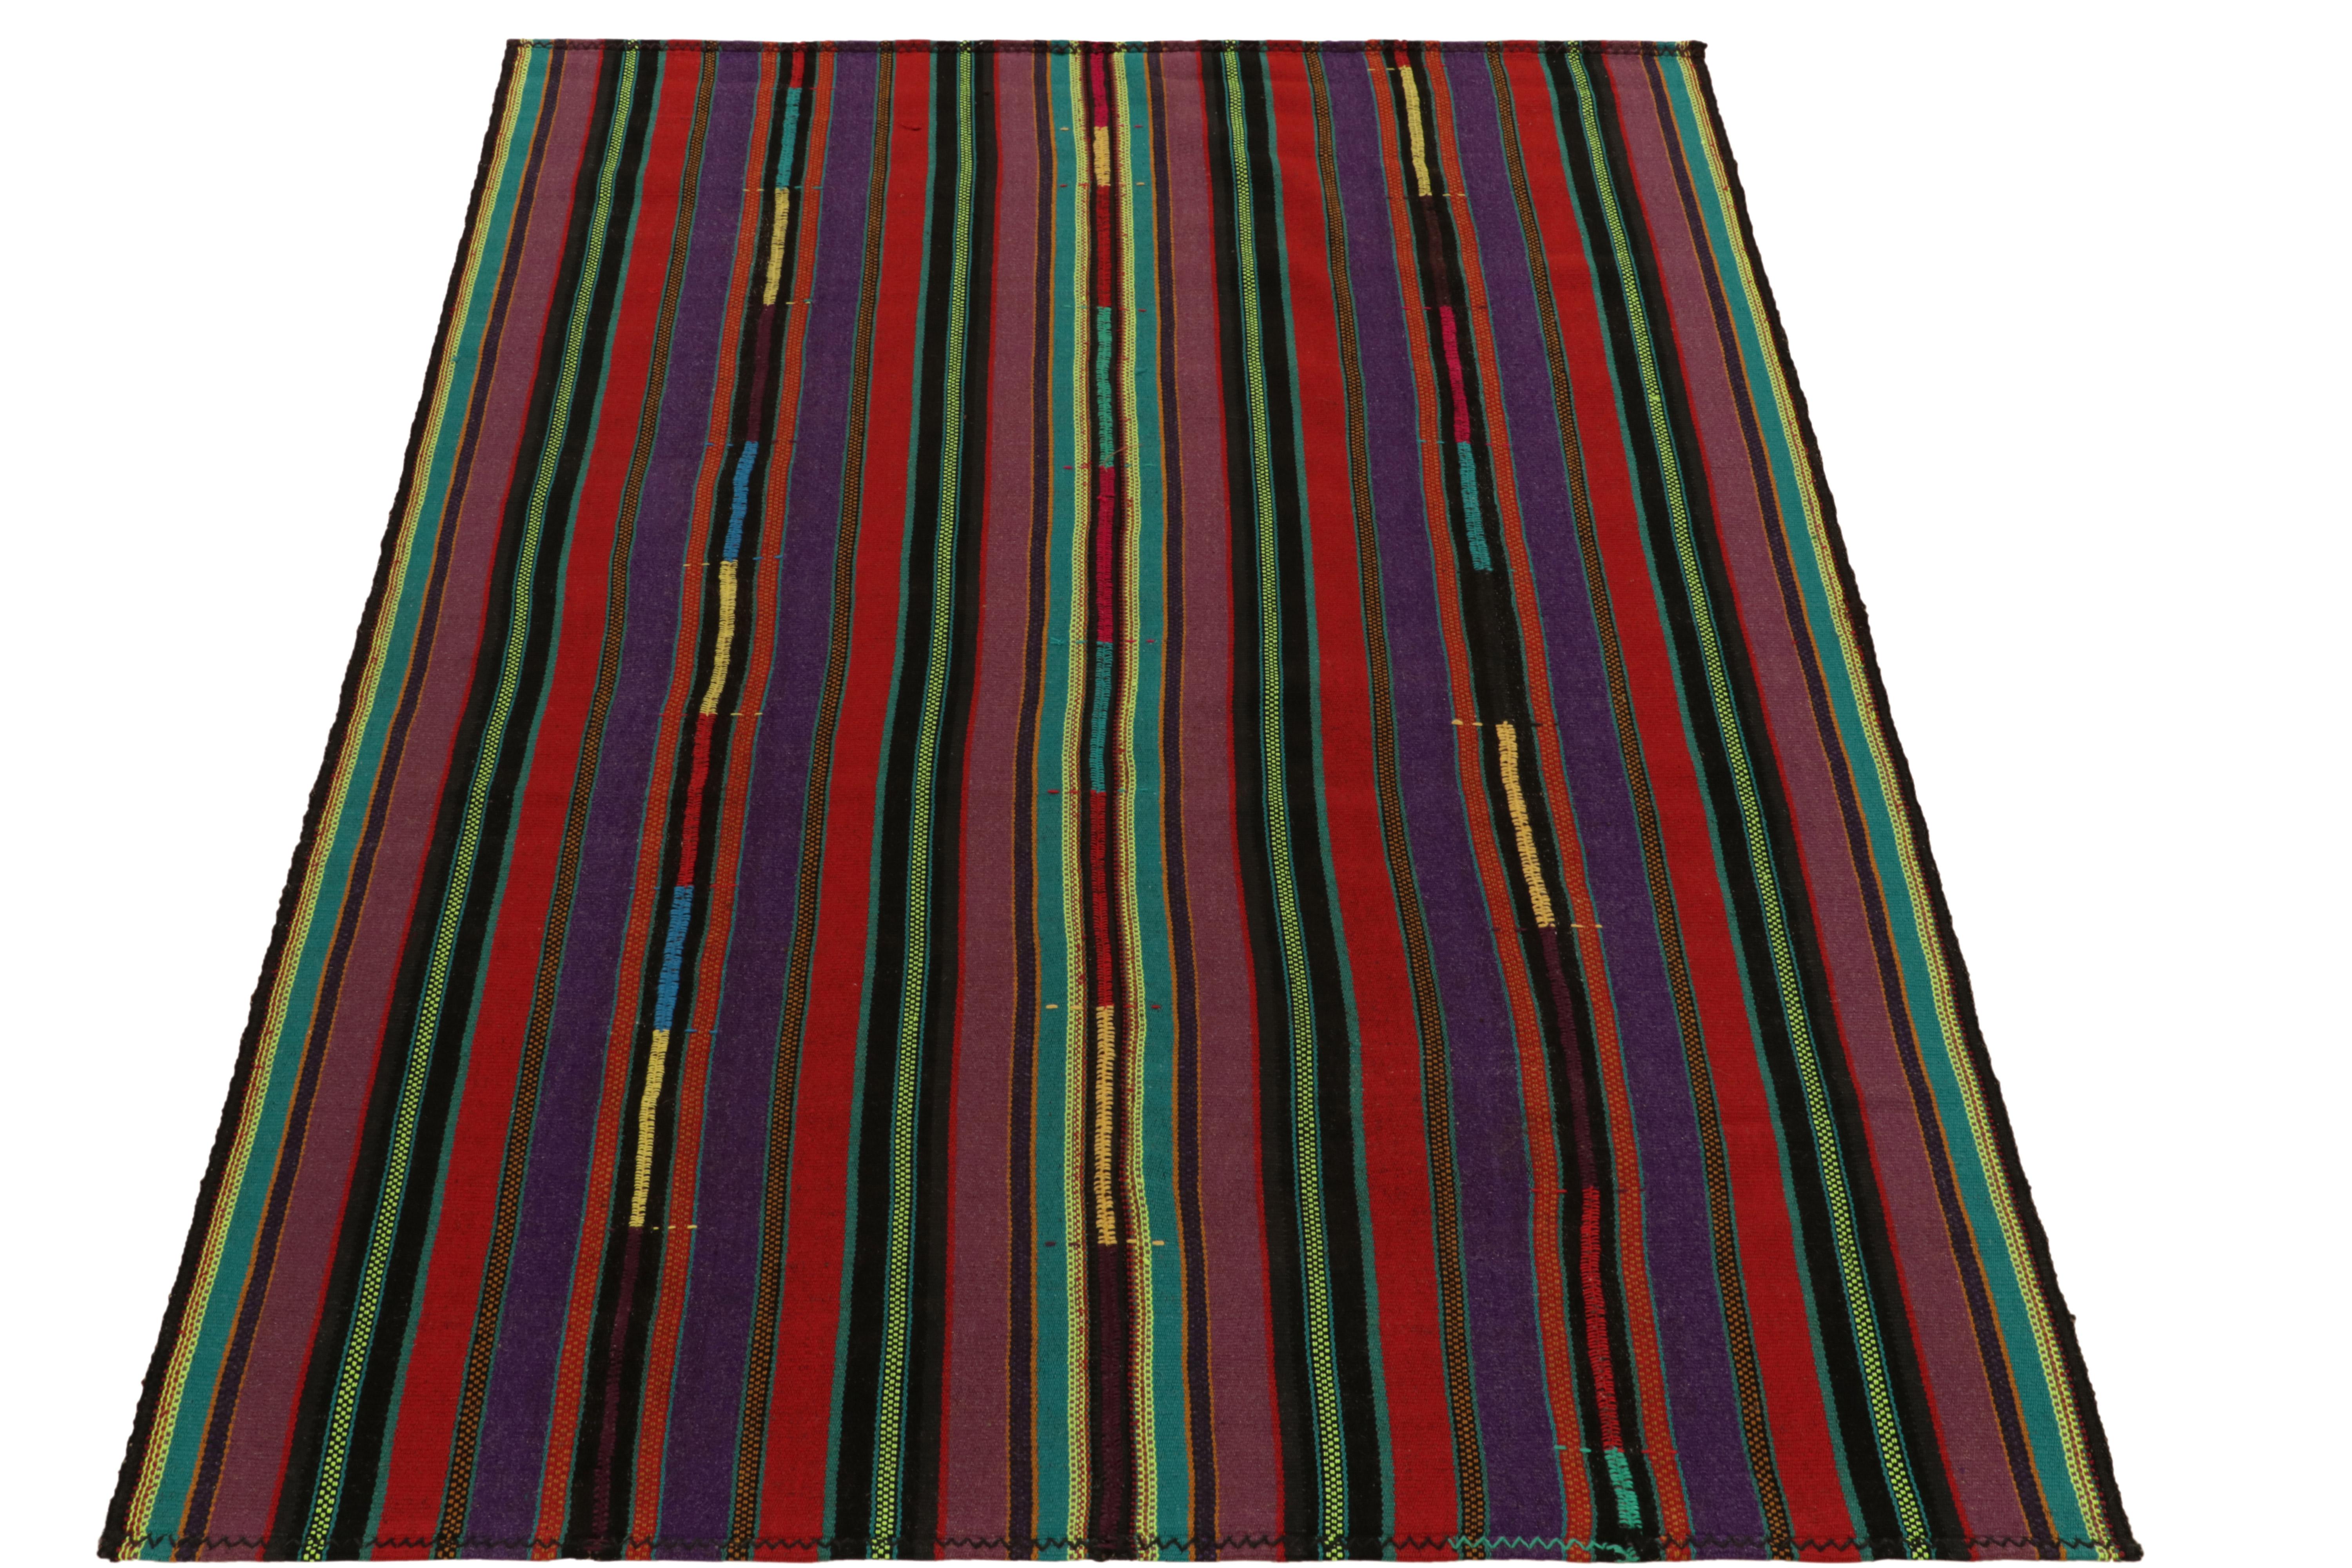 Hailing from Turkey circa 1950-1960, among a rare curation of mid-century chaput kilim rugs family in our collection. Characterized by fine detailing with the colors within the polychromatic stripes, the eccentric piece invites a departure from